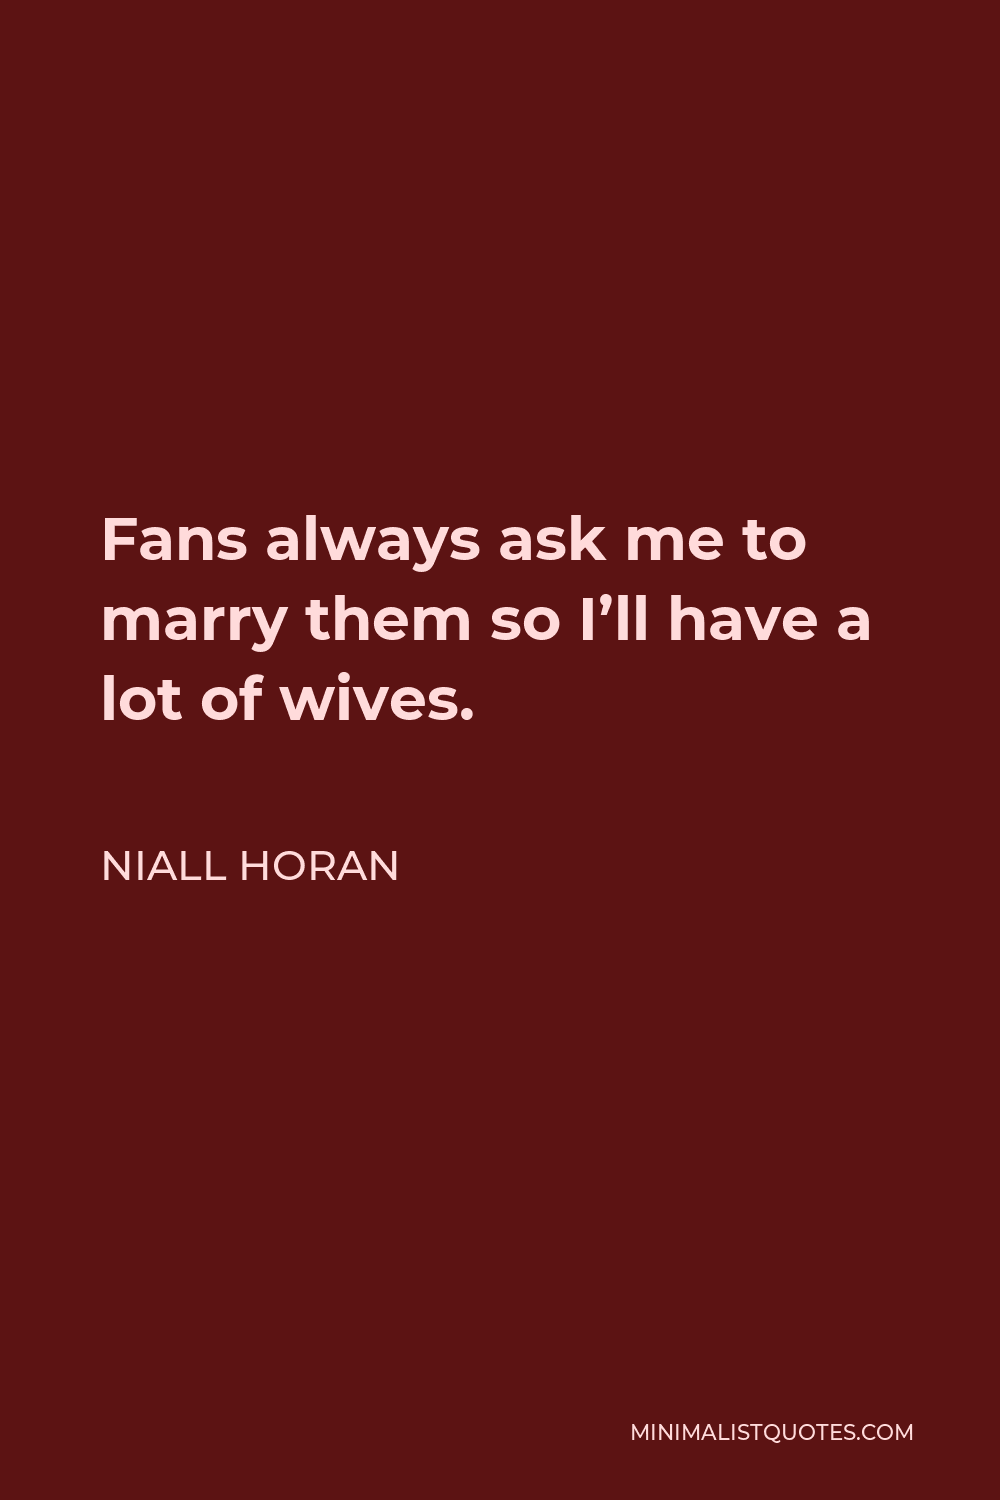 Niall Horan Quote - Fans always ask me to marry them so I’ll have a lot of wives.